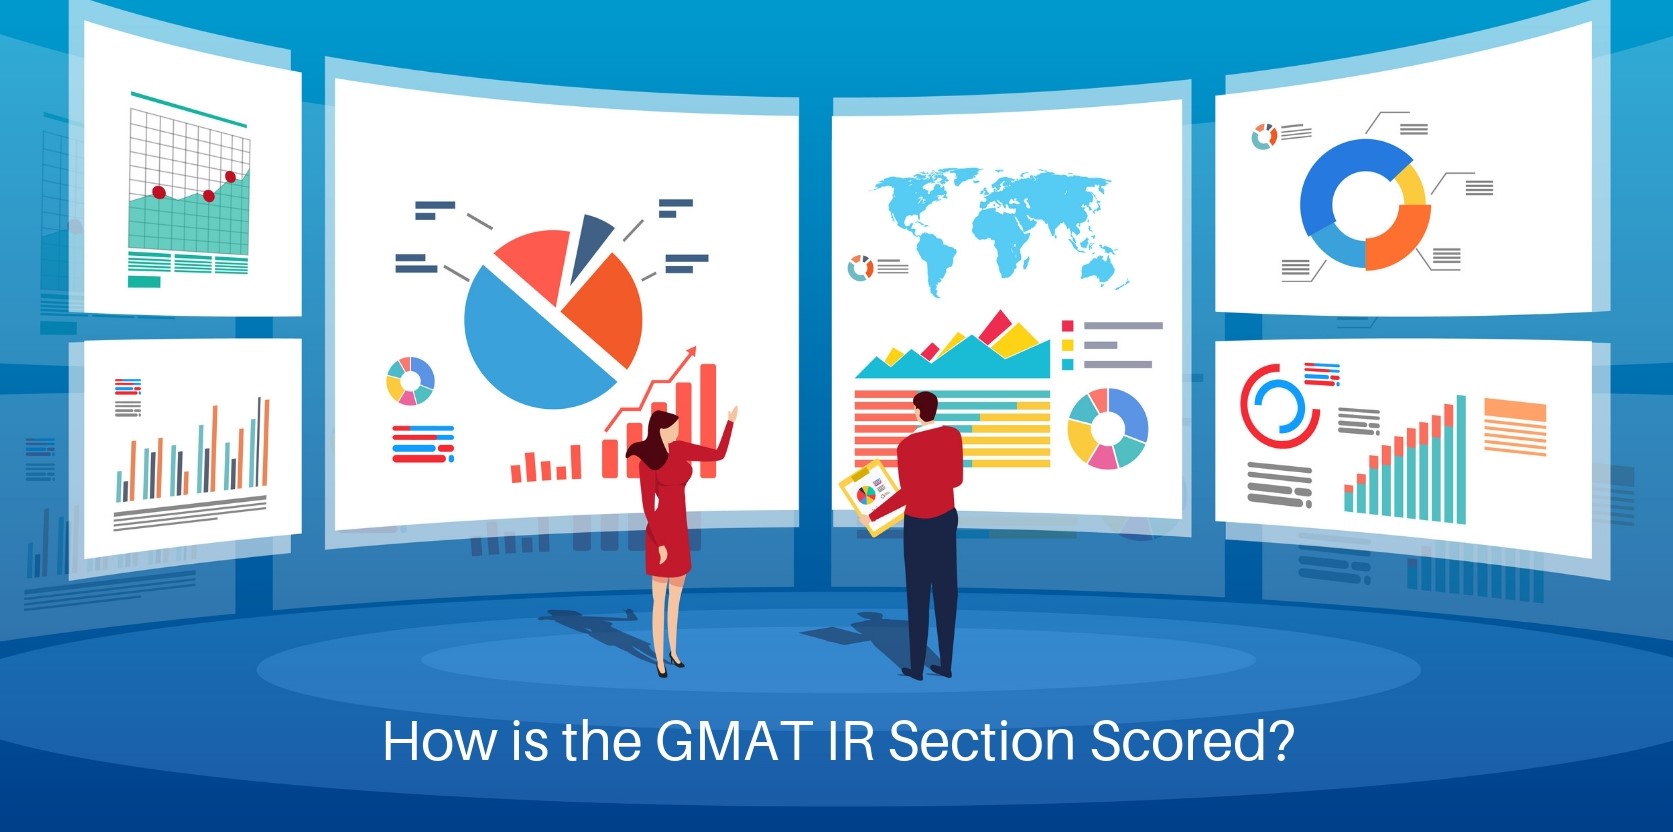 How is the GMAT IR Section Scored?